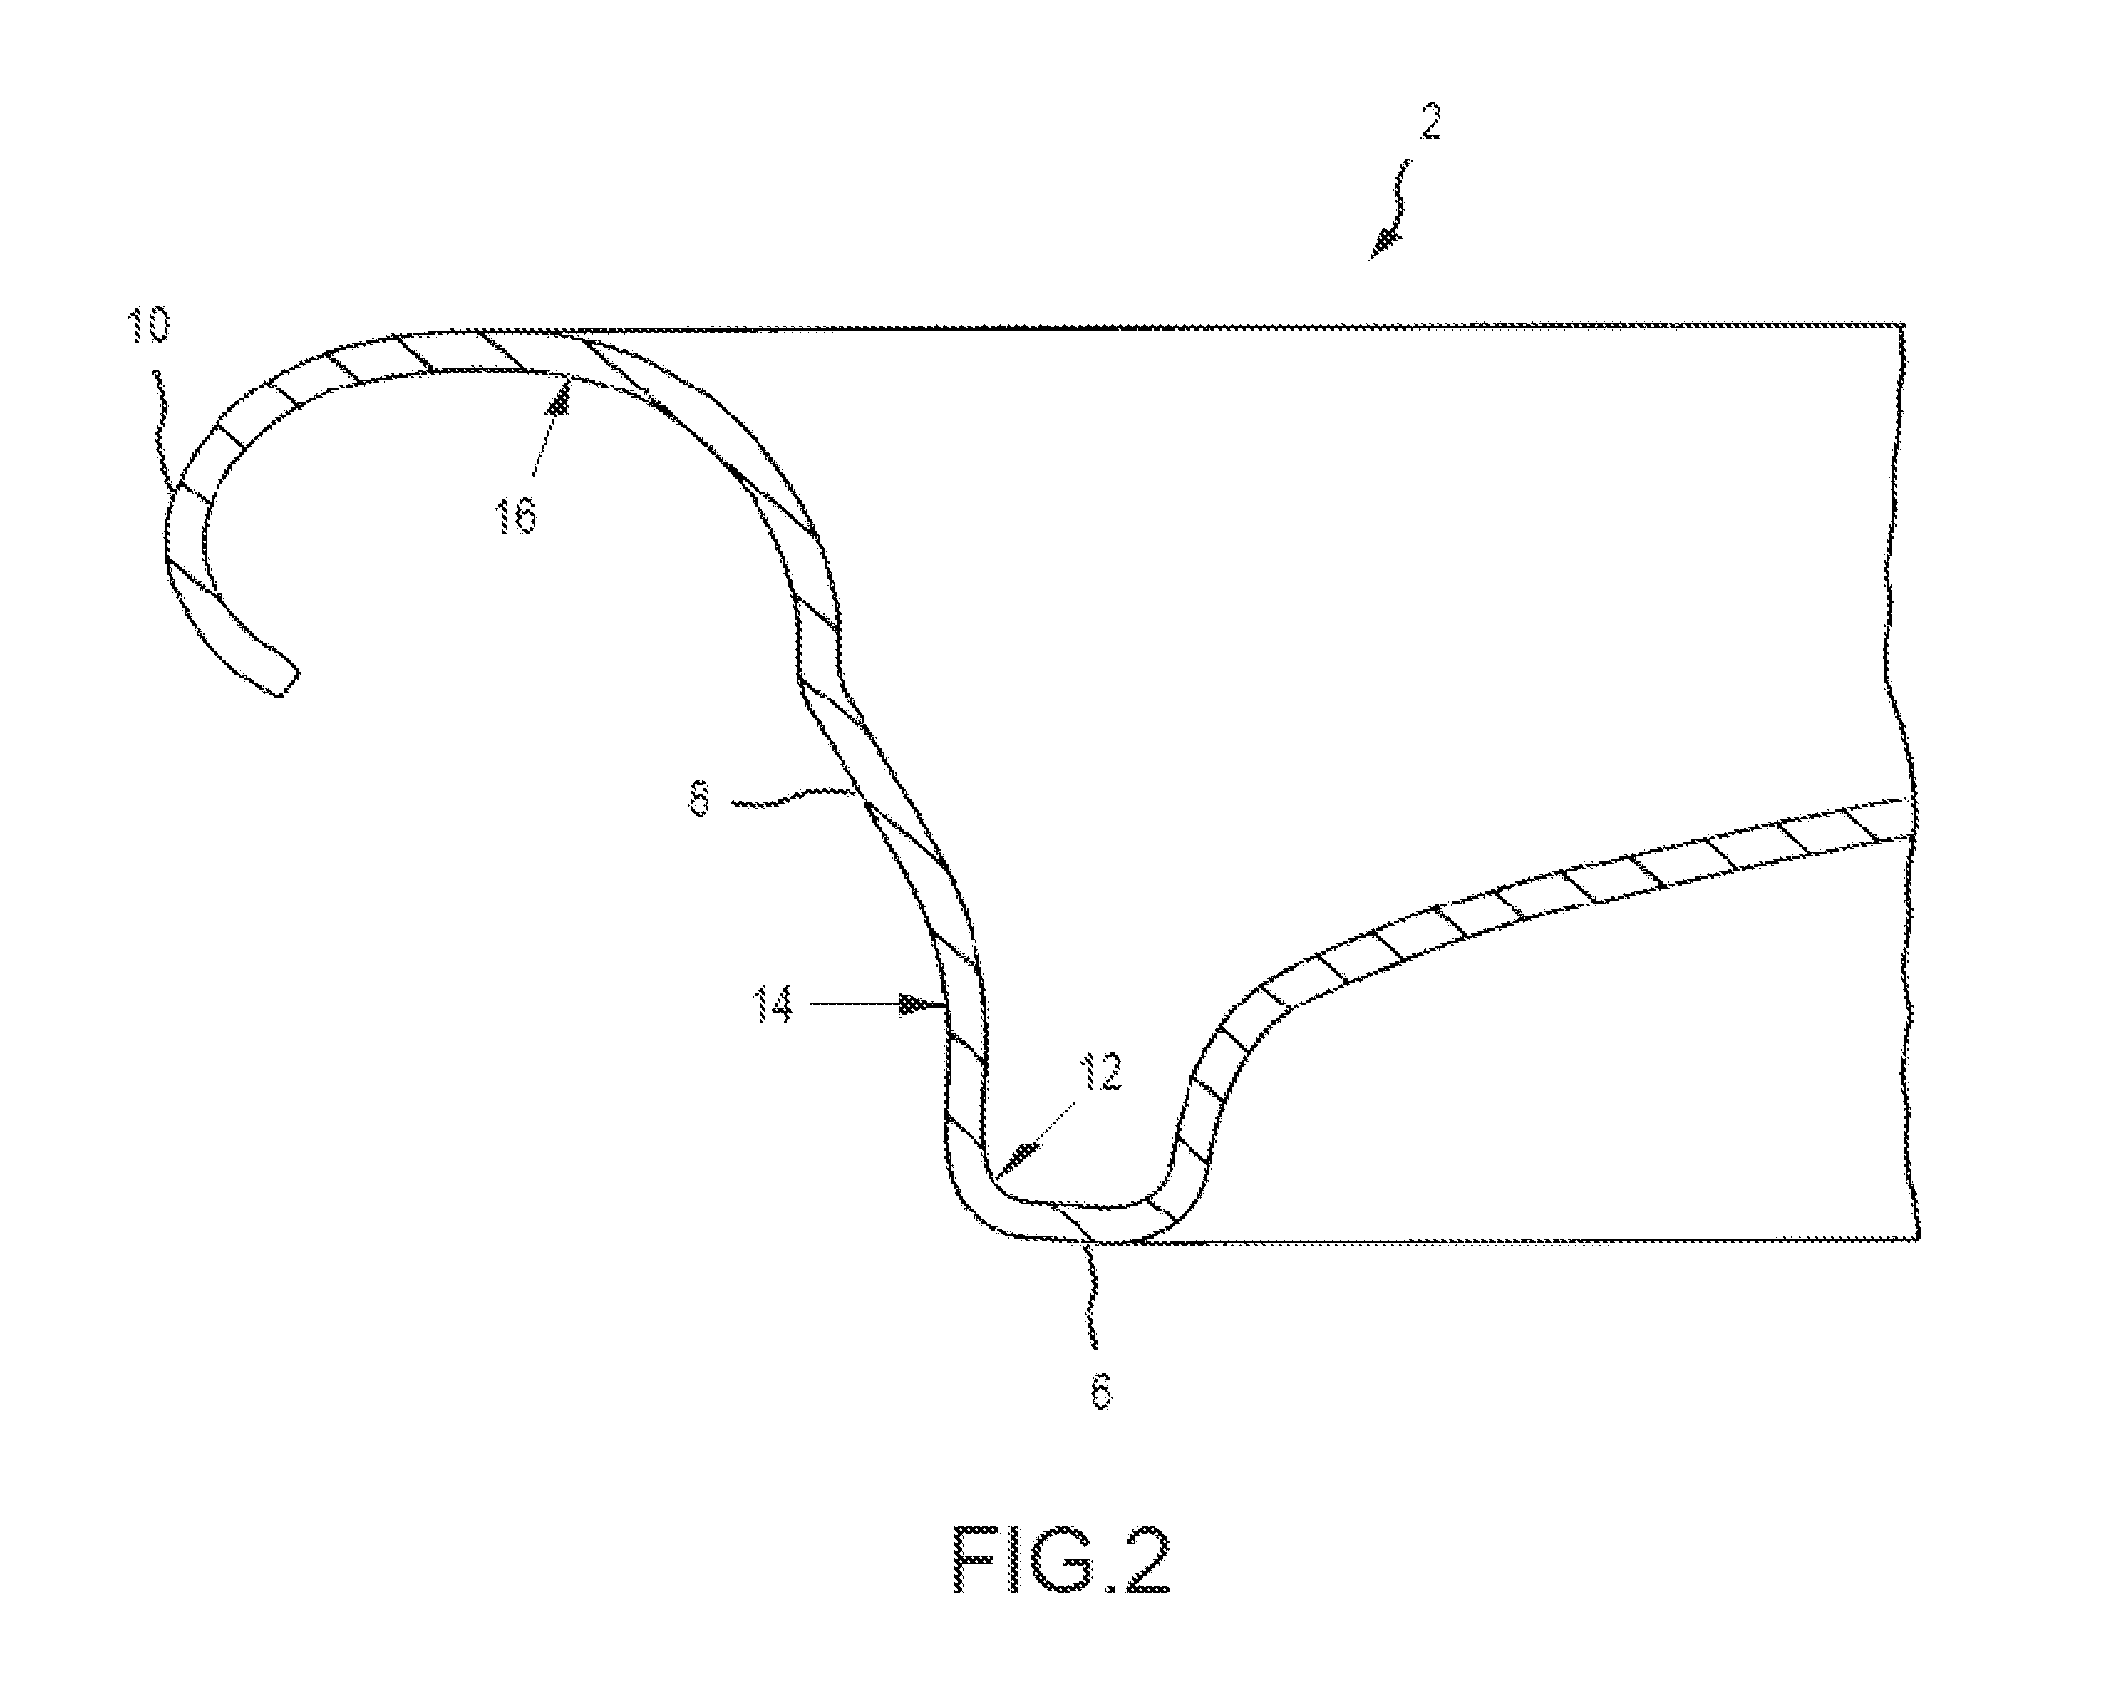 Method for filling, seaming, distributing and selling a beverage in a metallic container at a single location